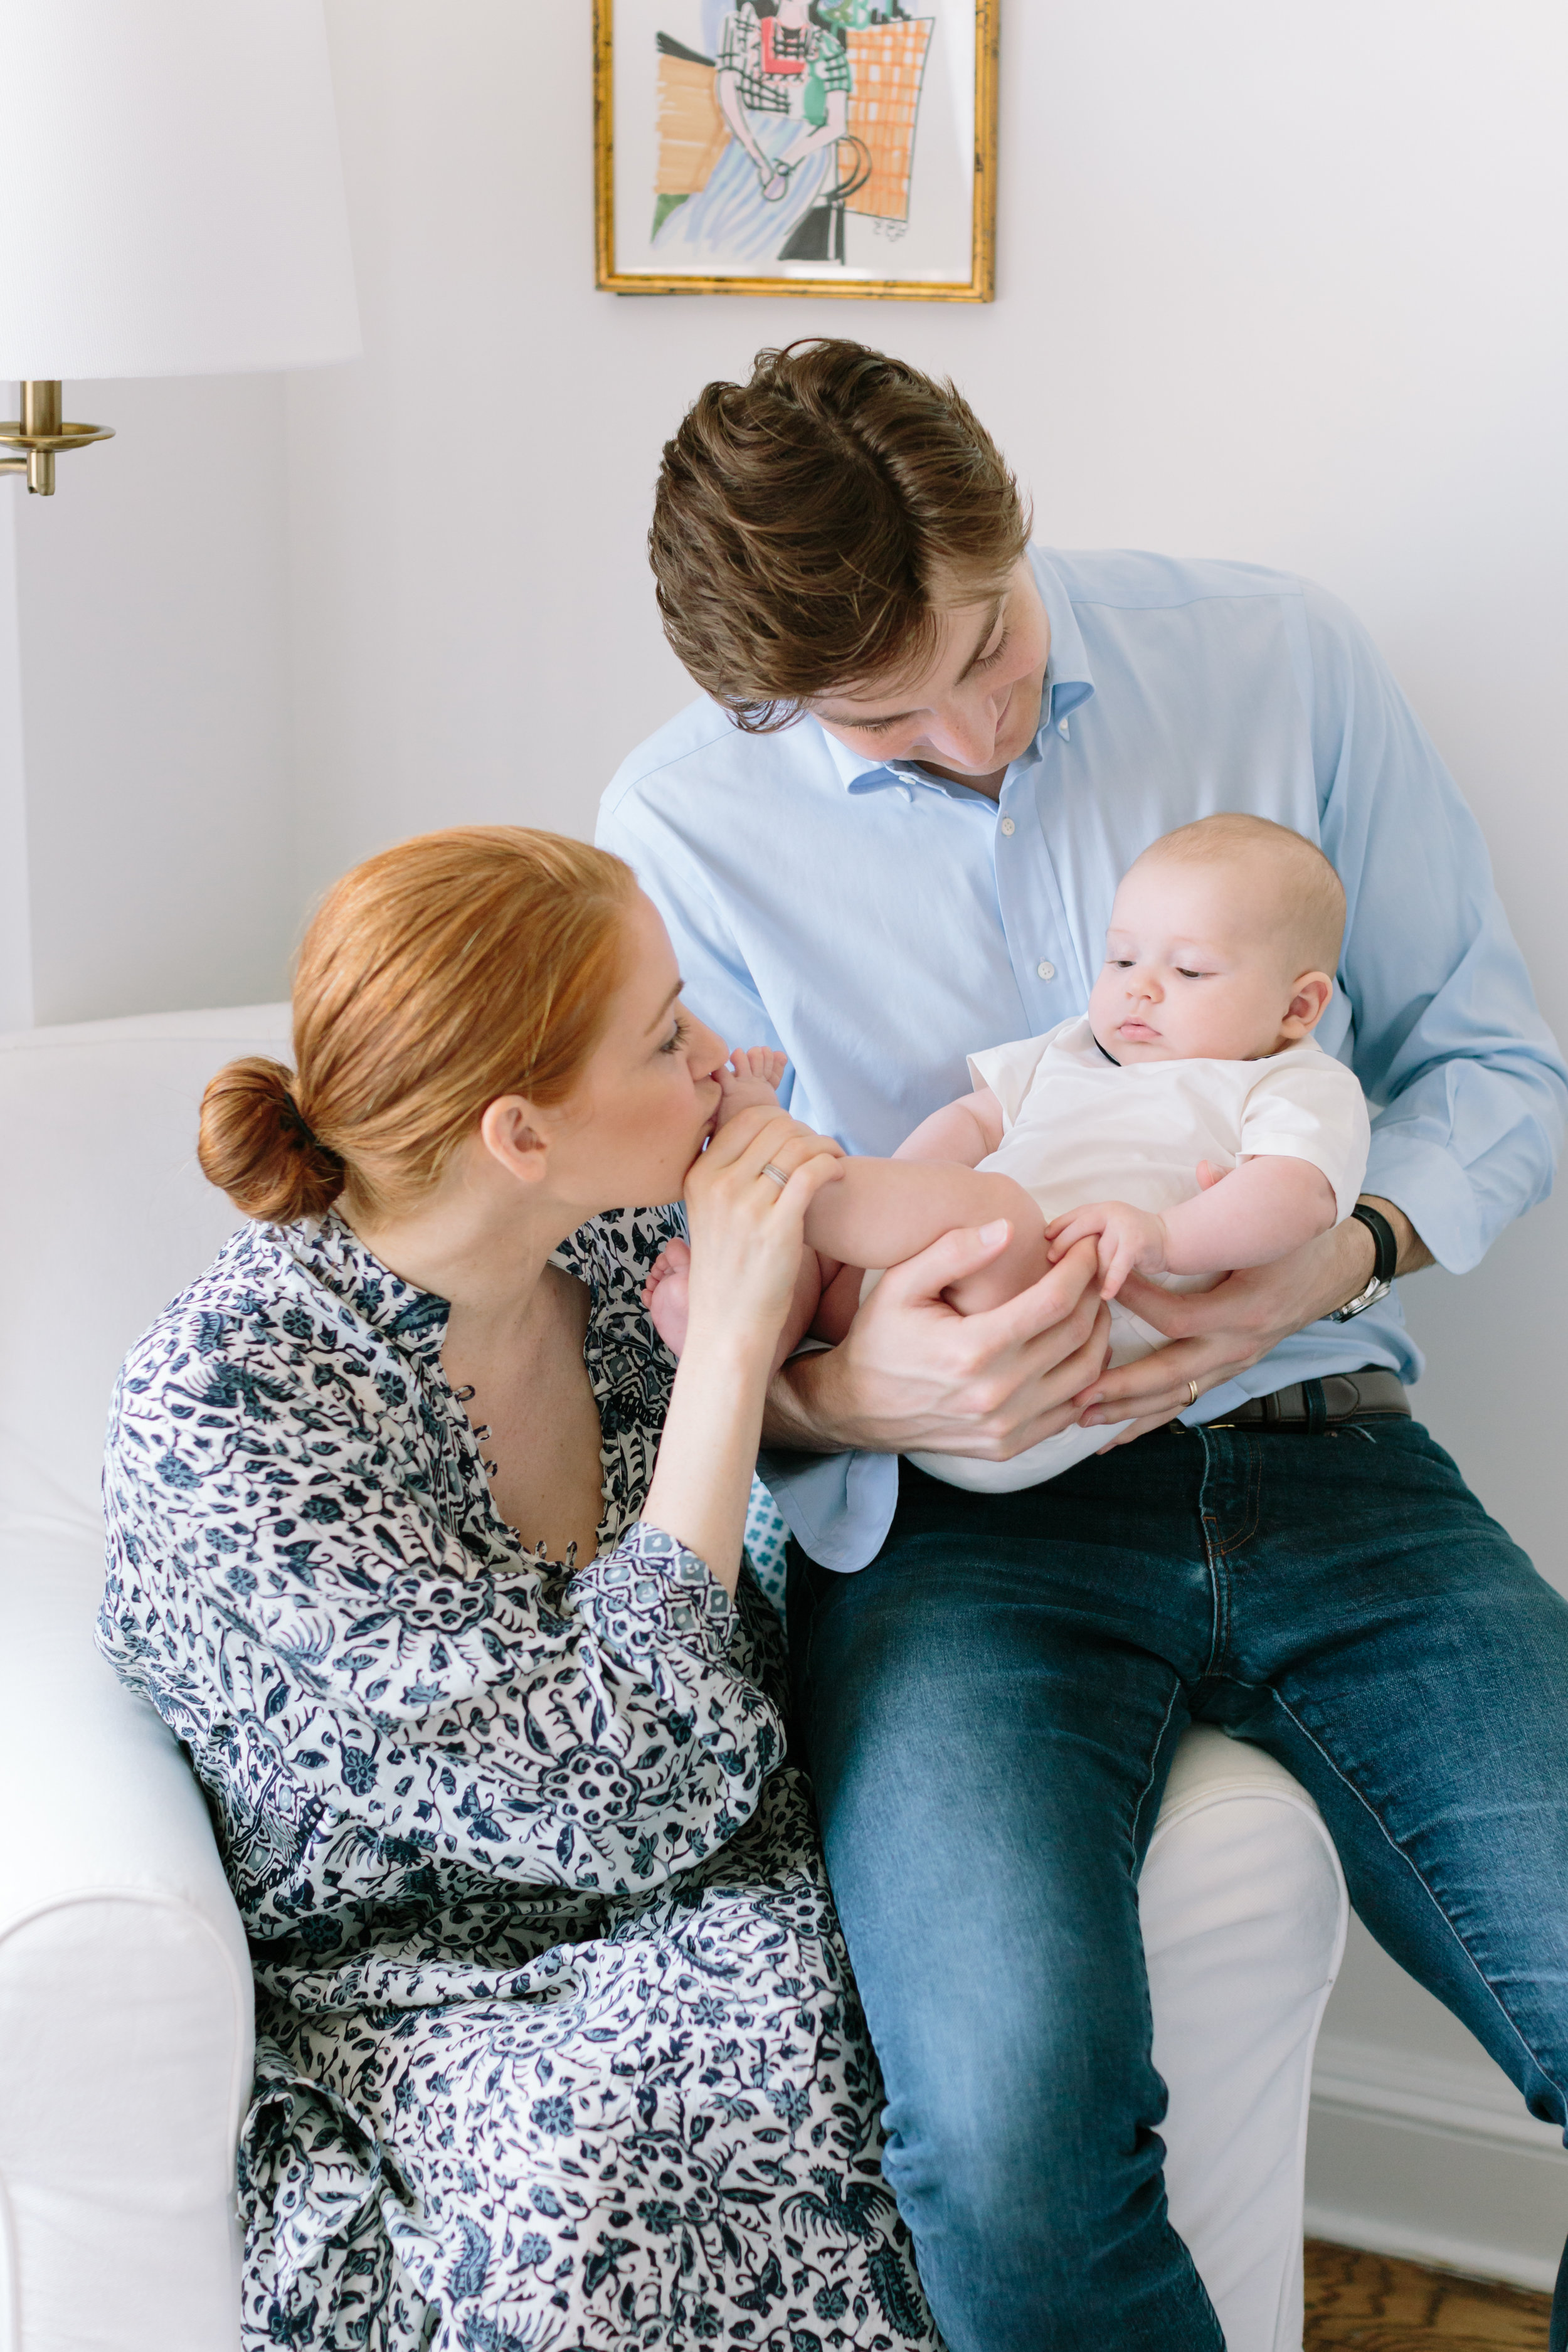 NYC Family Photographer, Jacqueline Clair, features a beautiful family session in Upper East Side